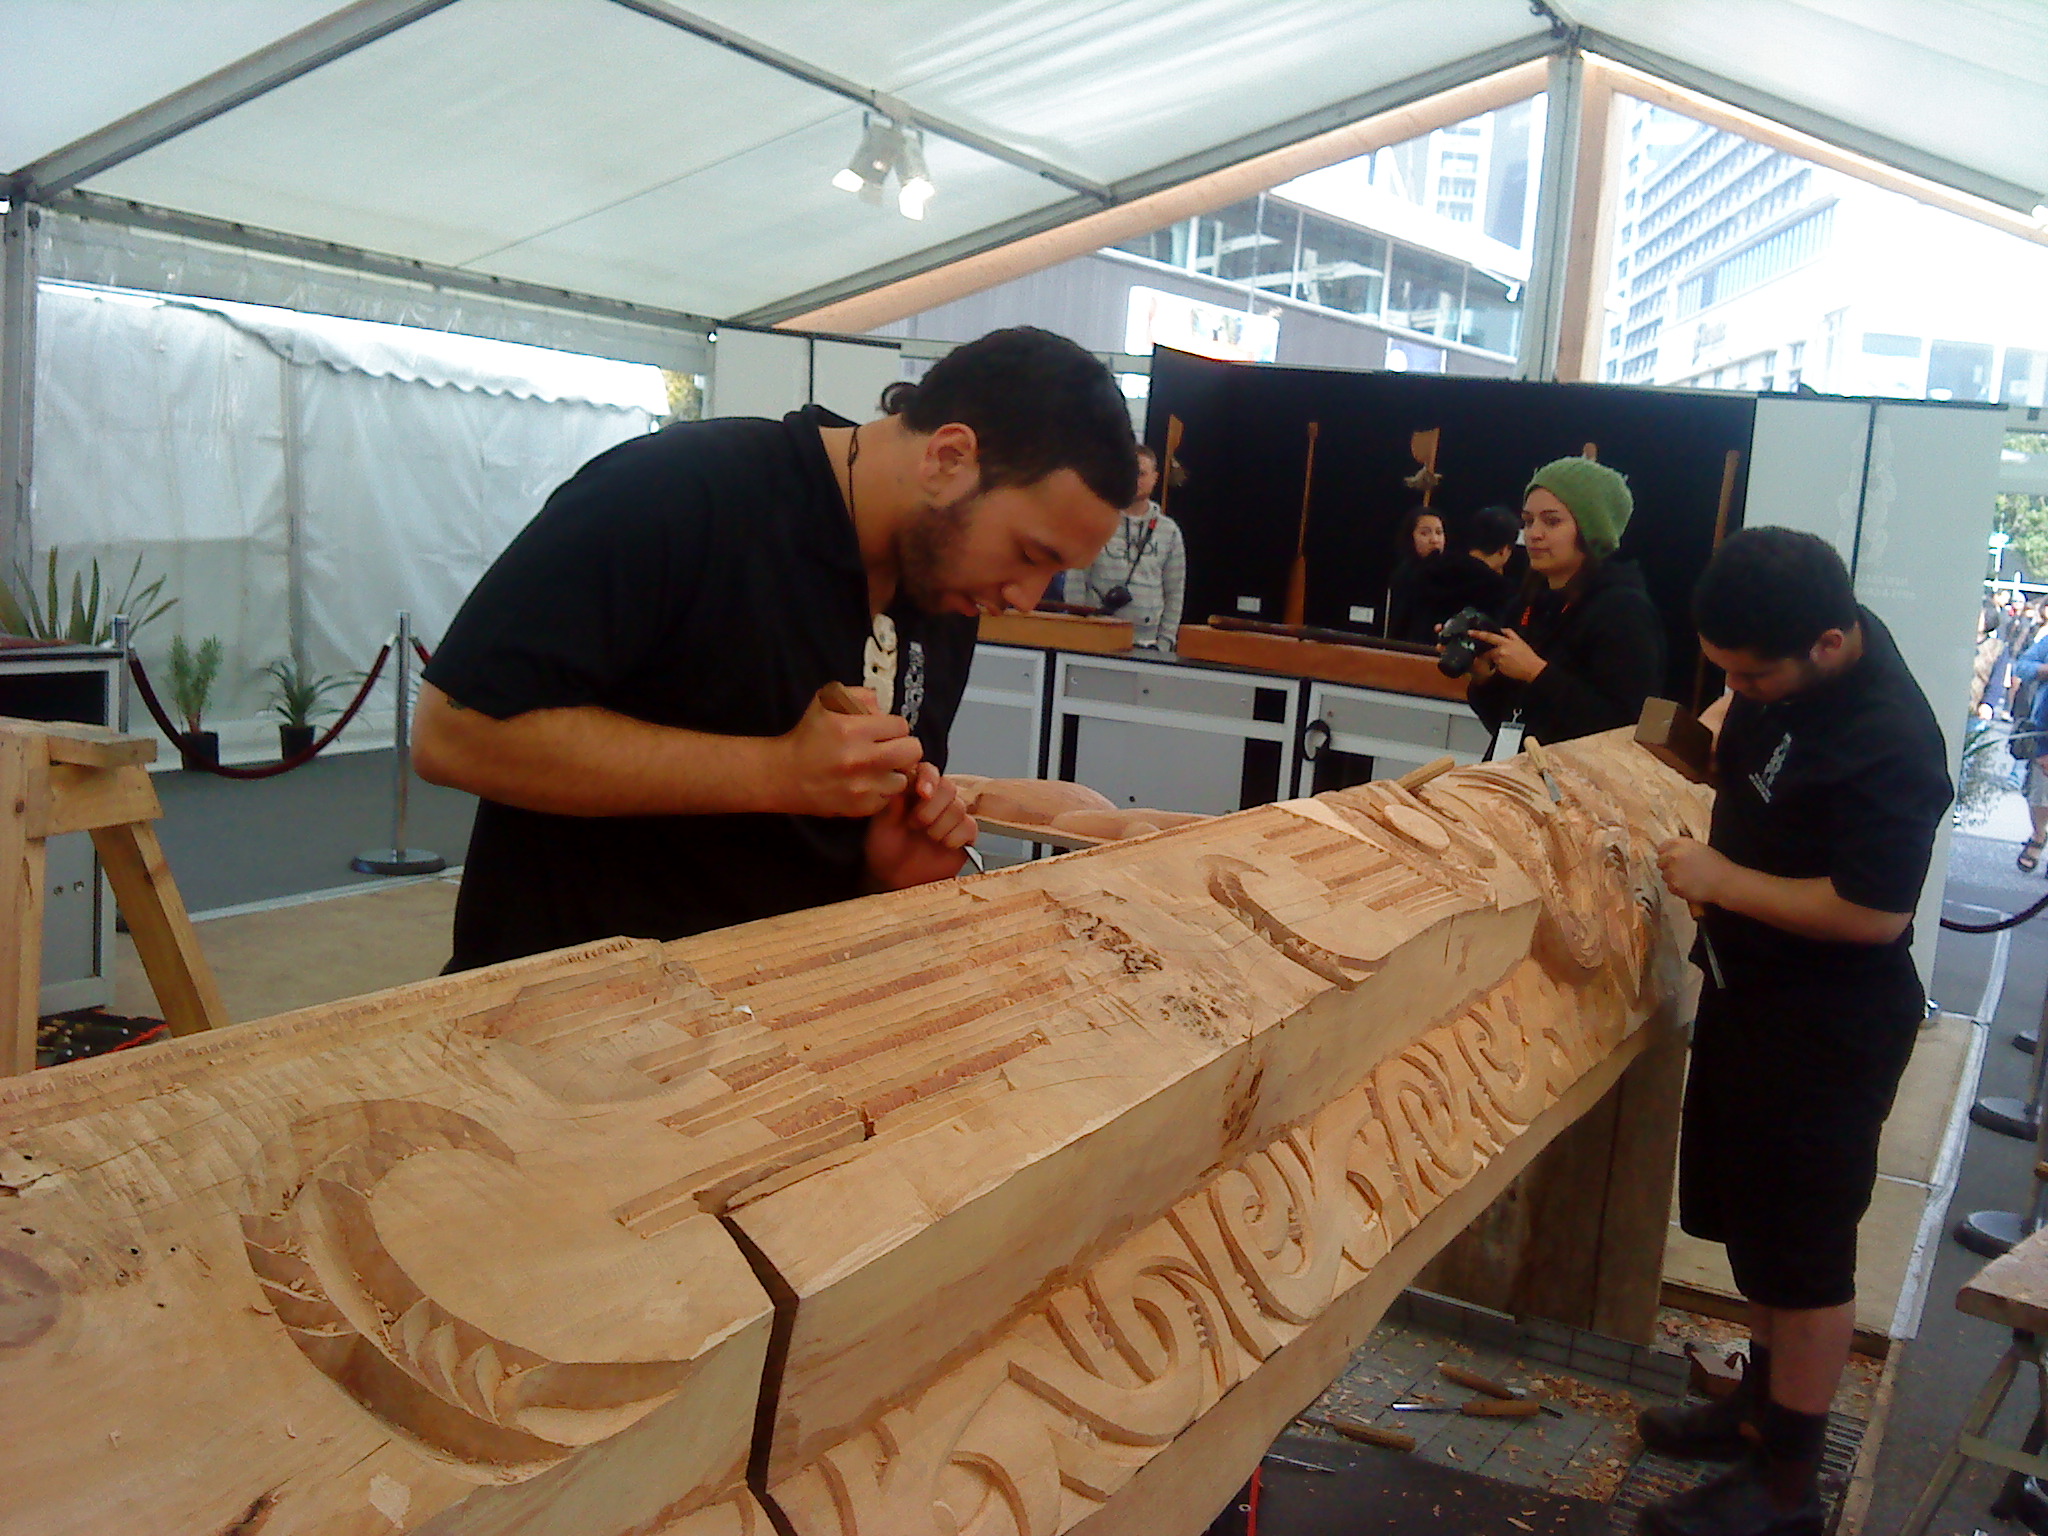 Pou being carved at the Viaduct during the RWC 2011 events